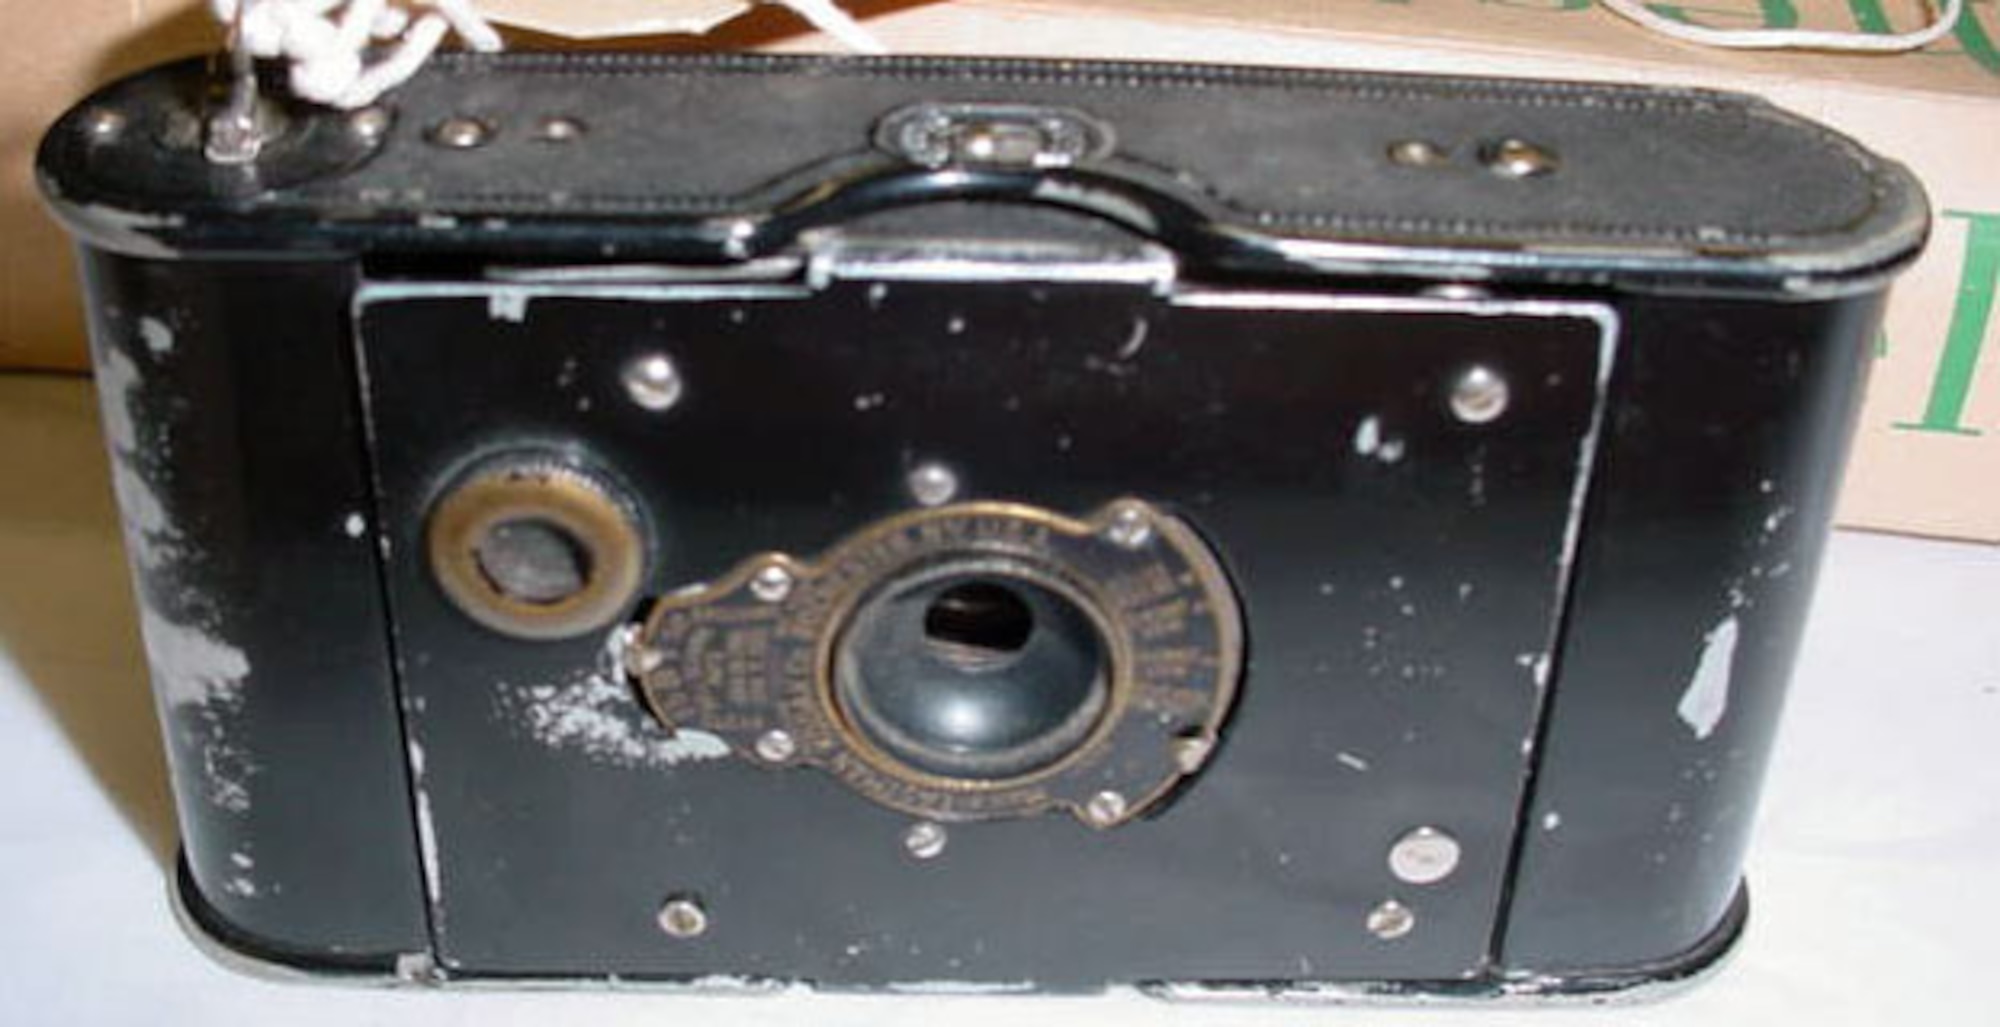 This camera was used by Lt. Robert Rutherford Nelson, an American who enlisted in the Royal Flying Corps during World War I. Lt. Nelson only began flight school in January 1918, so neither he nor his "Salamander" unit saw combat. (U.S. Air Force photo)